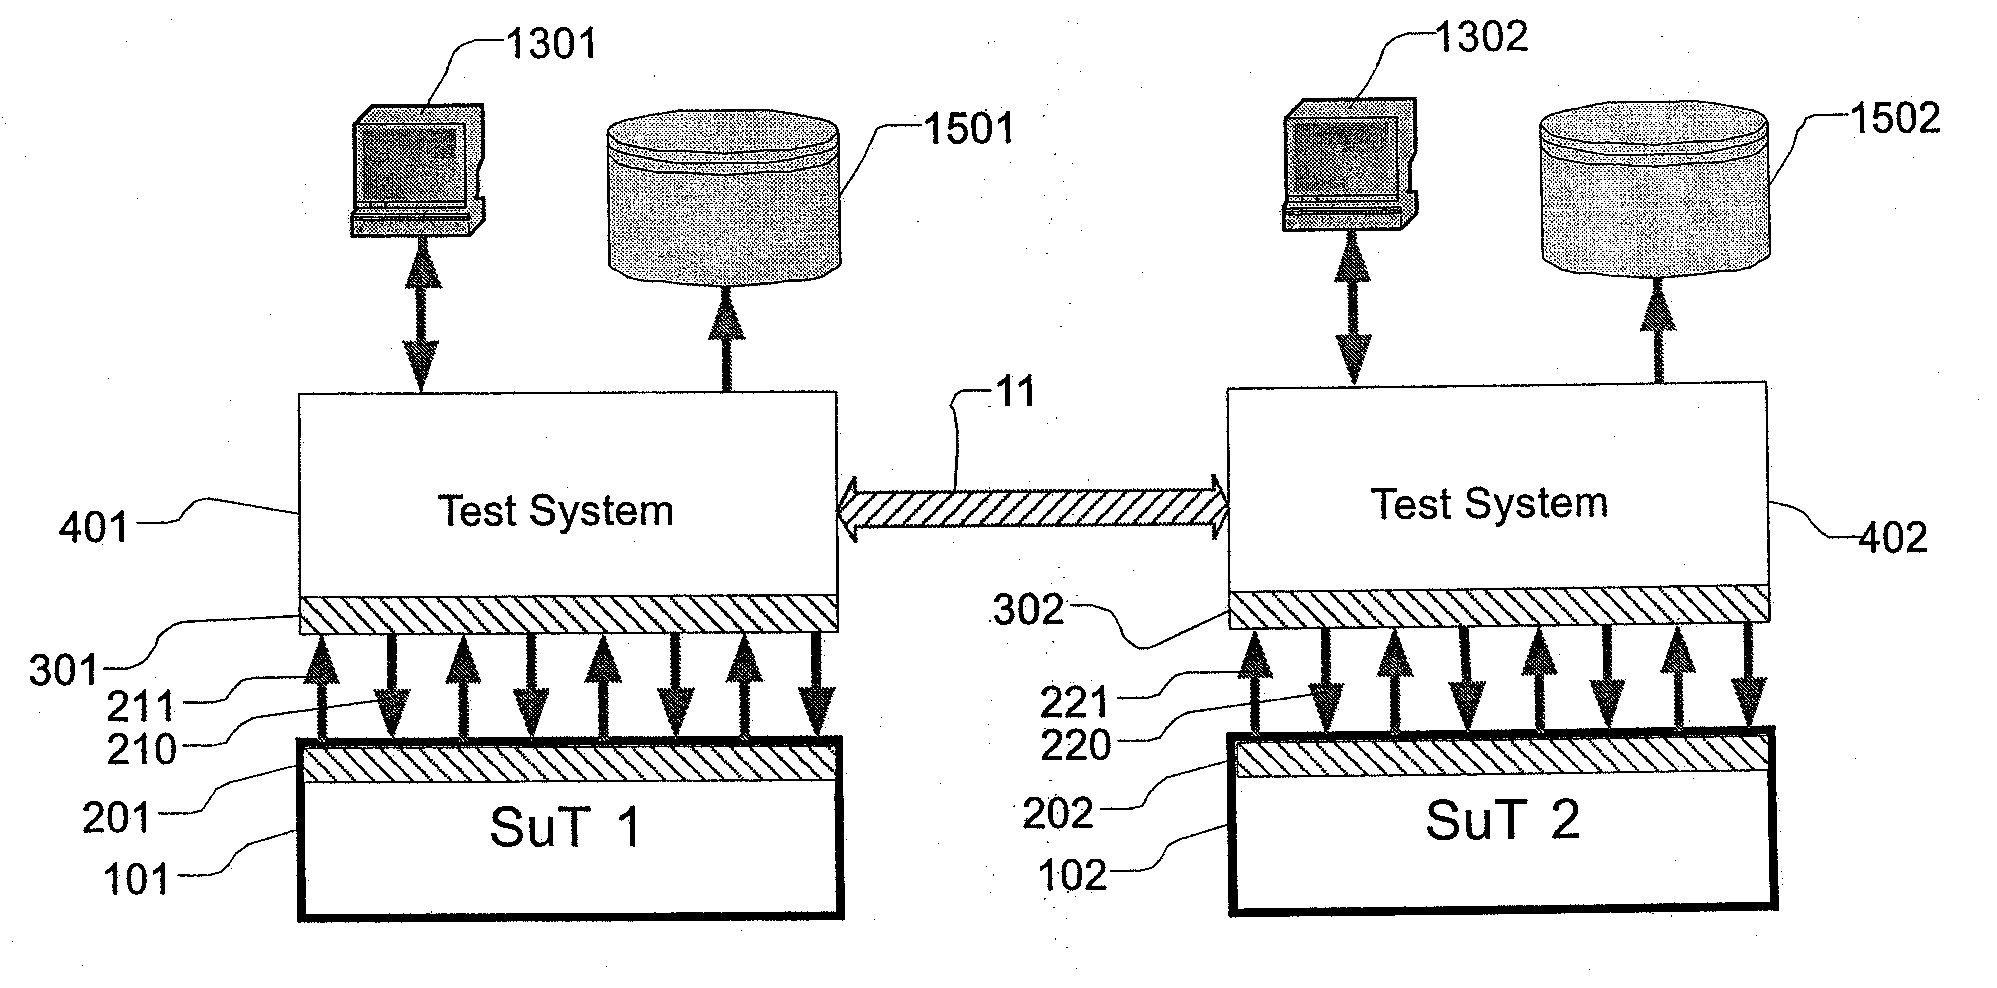 Test system combination for testing several systems under test in parallel, comprising several test systems